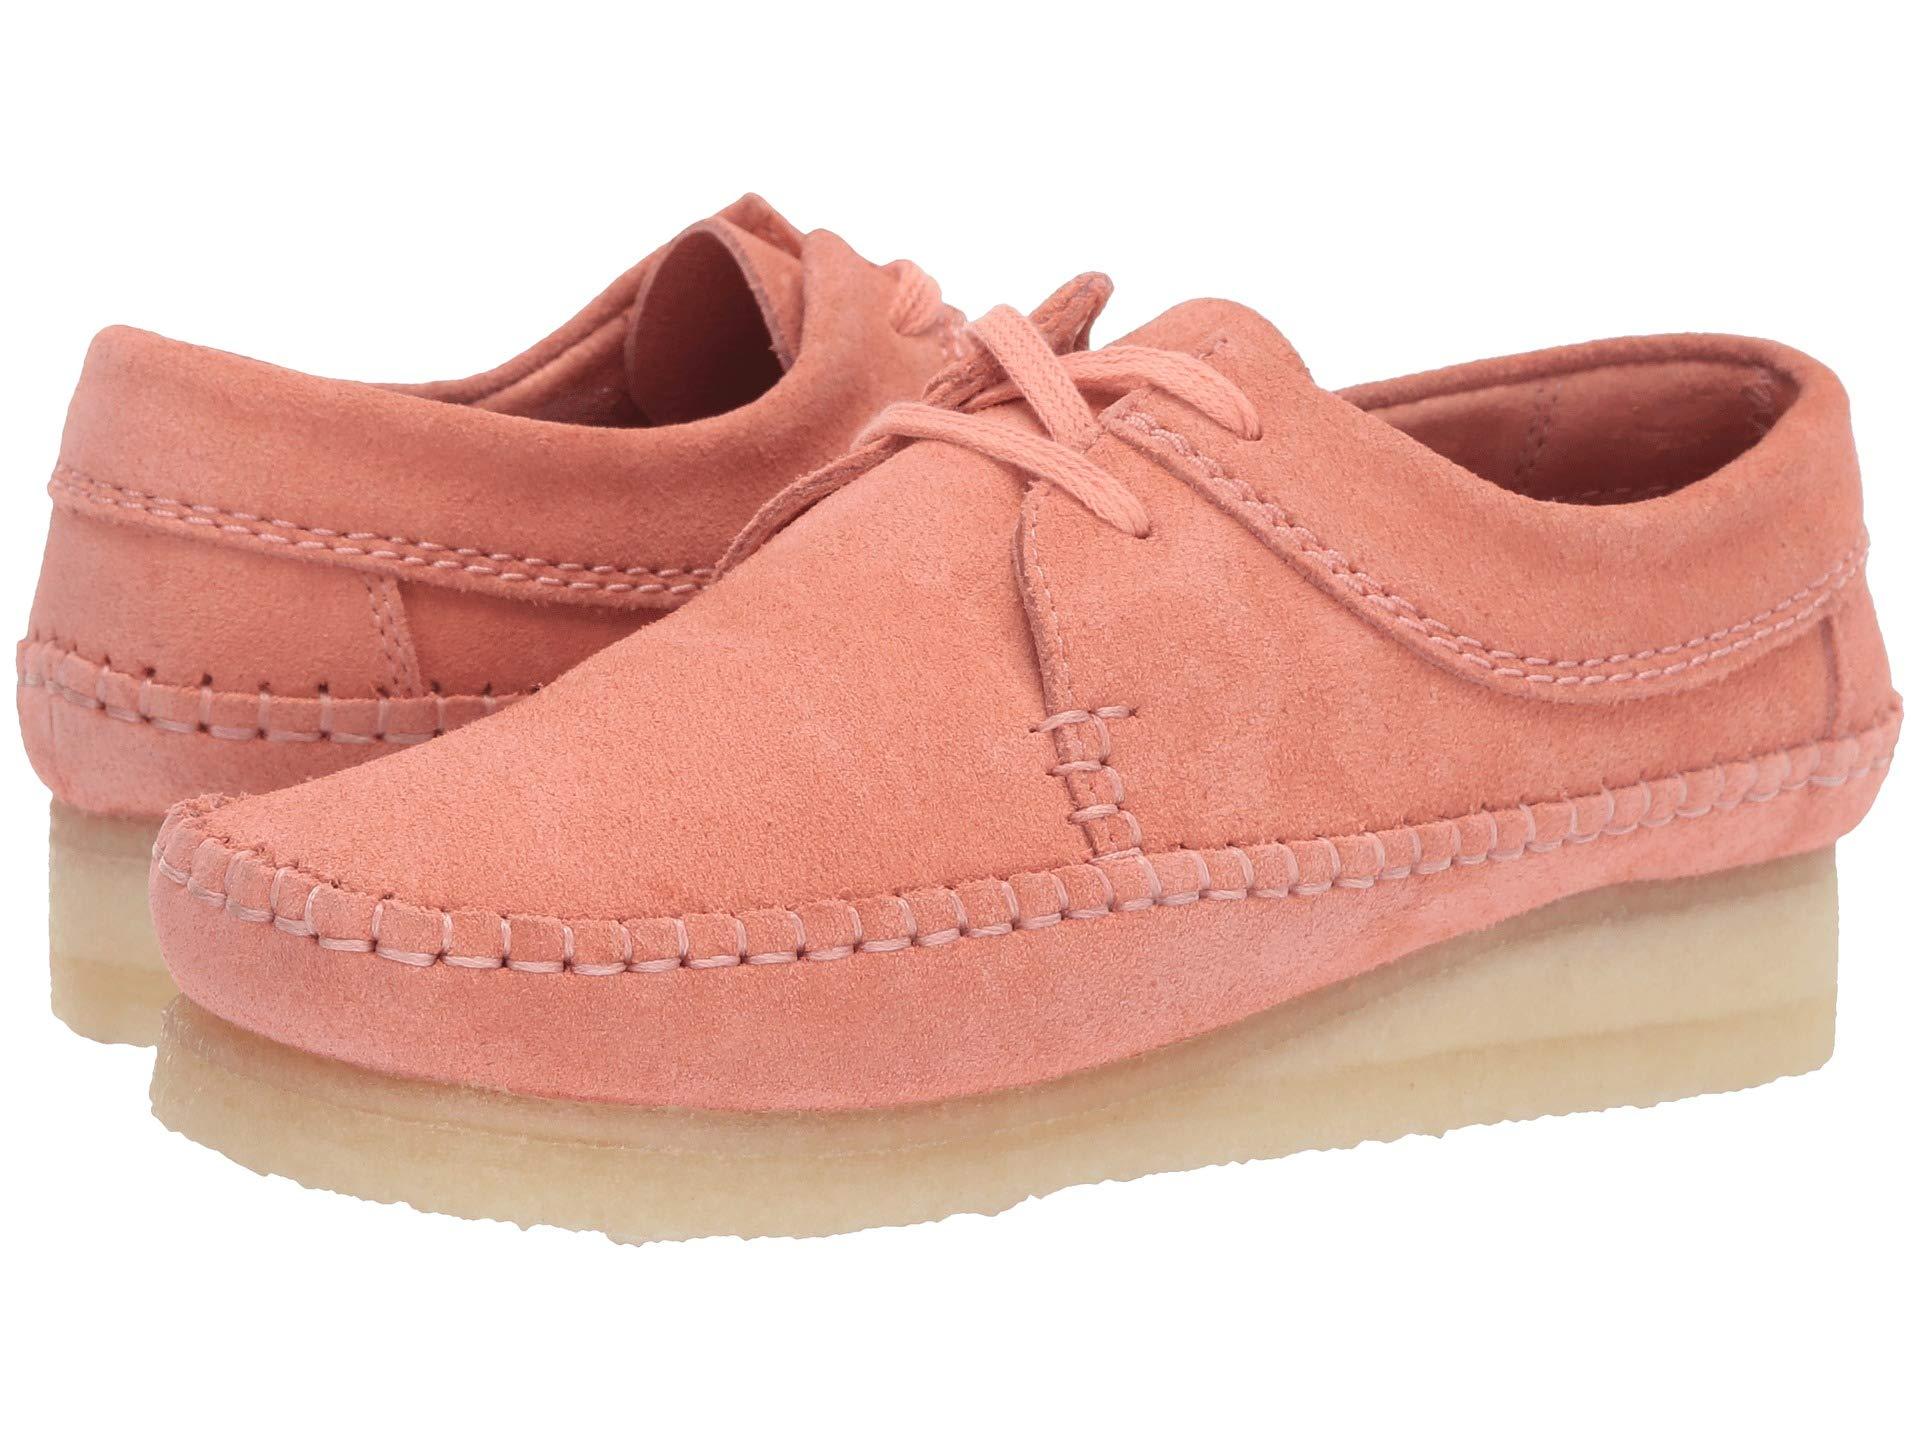 Clarks Originals Weaver Suede Casual Flat Lace-Up Moccasin Womens Shoes 